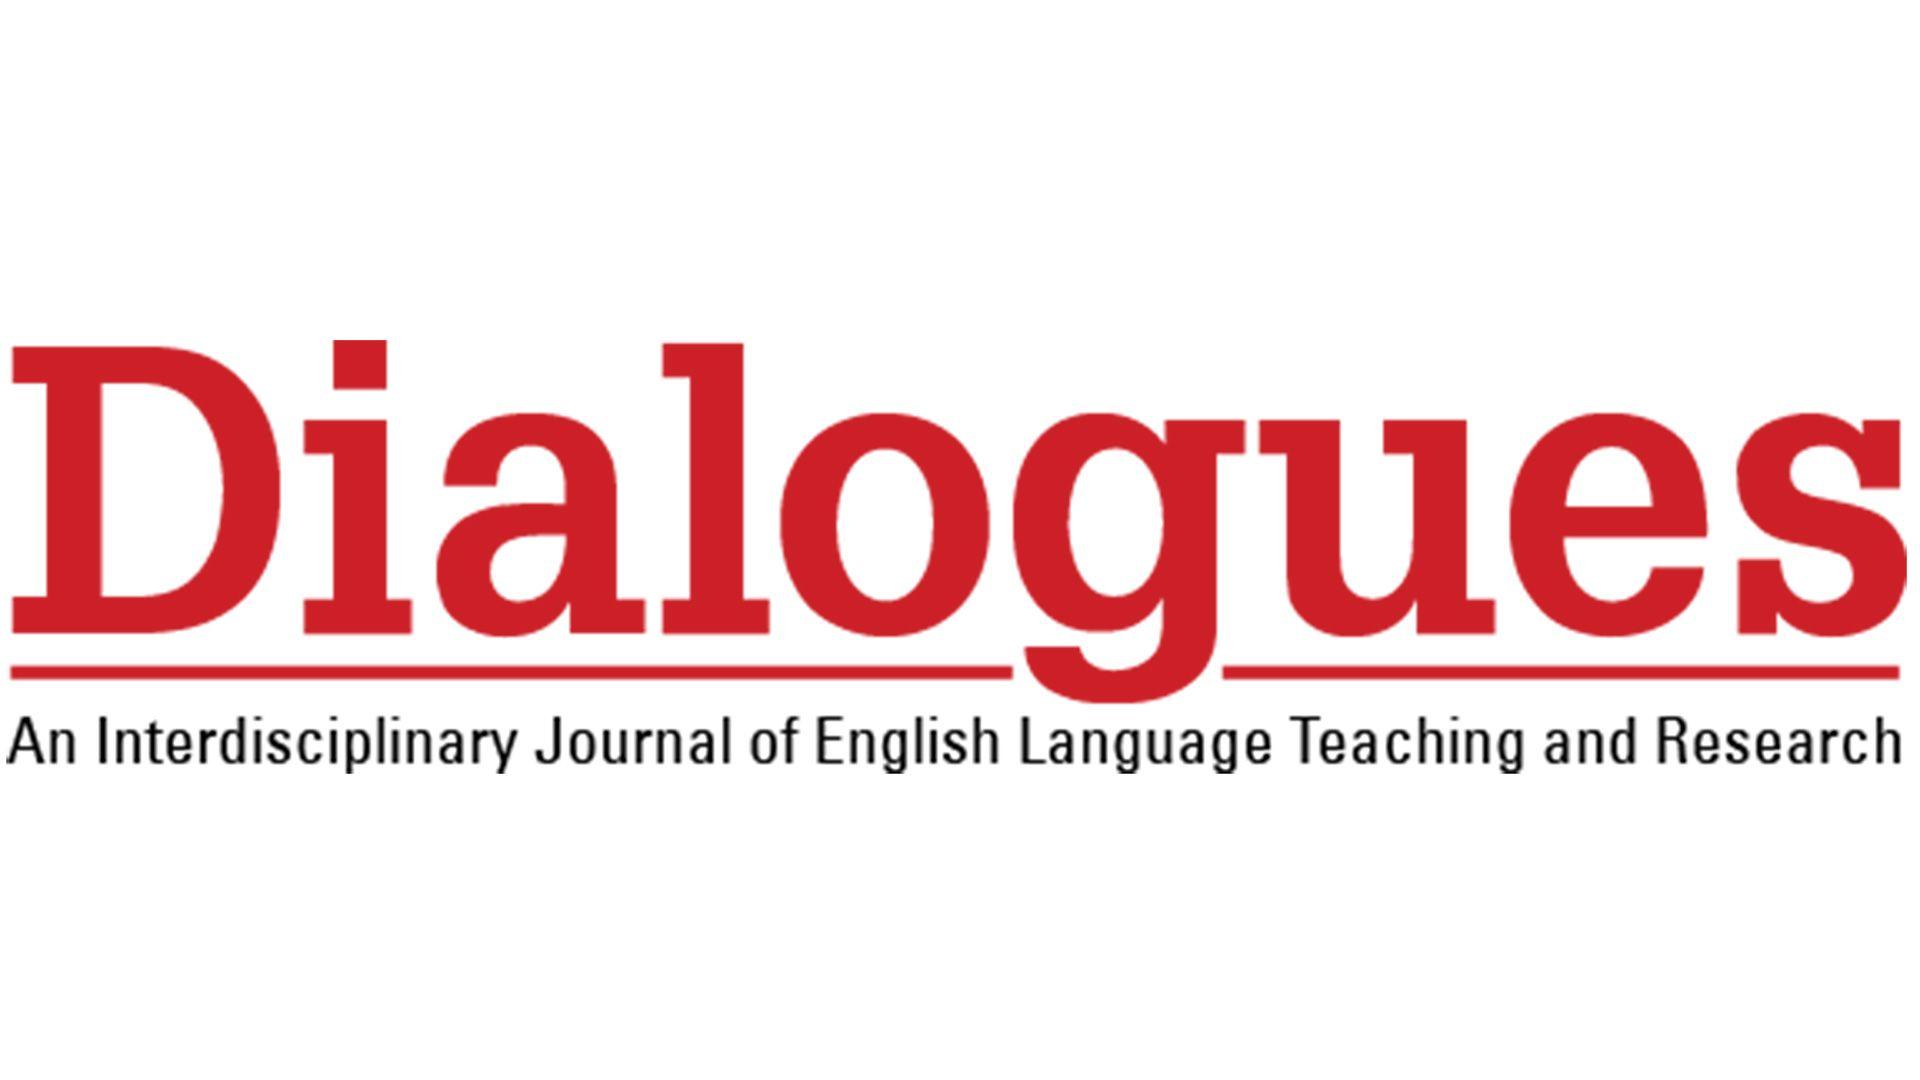 Red Foreign Language Logo - New Scholarly Journal for English Language Teaching and Research ...